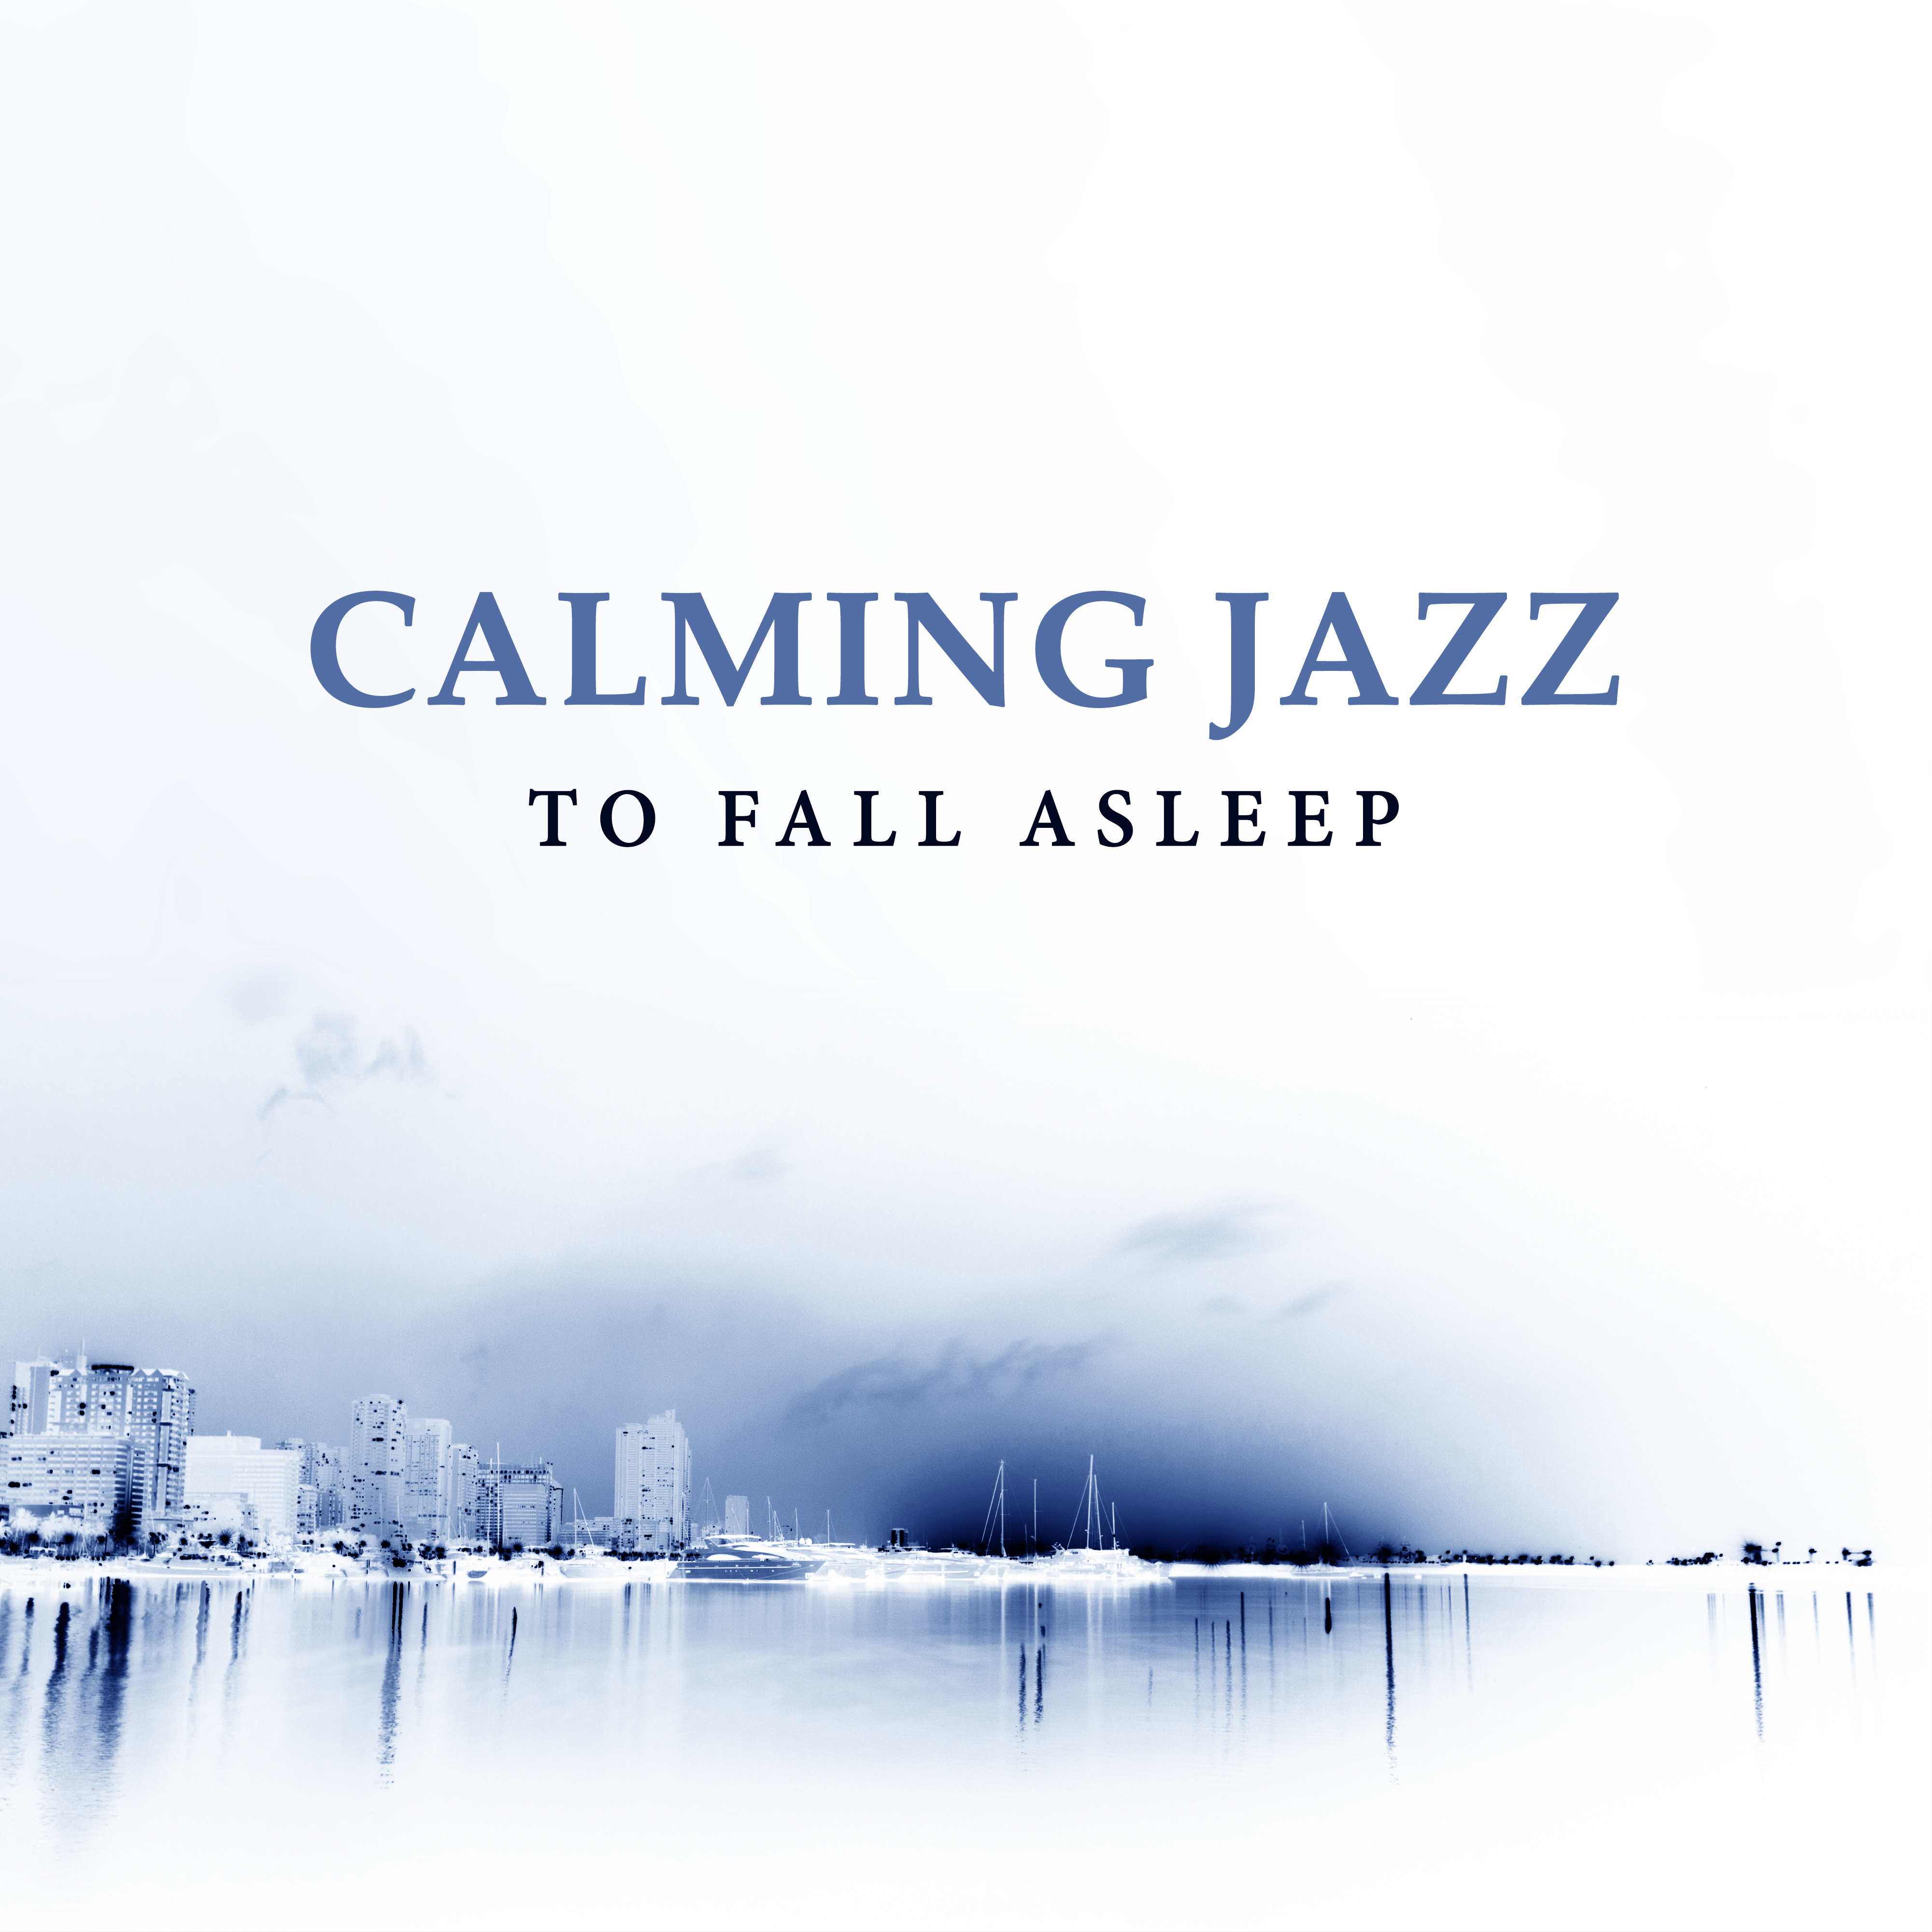 Calming Jazz to Fall Asleep – Rest with Smooth Music, Shades of Jazz, Easy Listening, Relaxing Night Sounds, Waves of Calmness